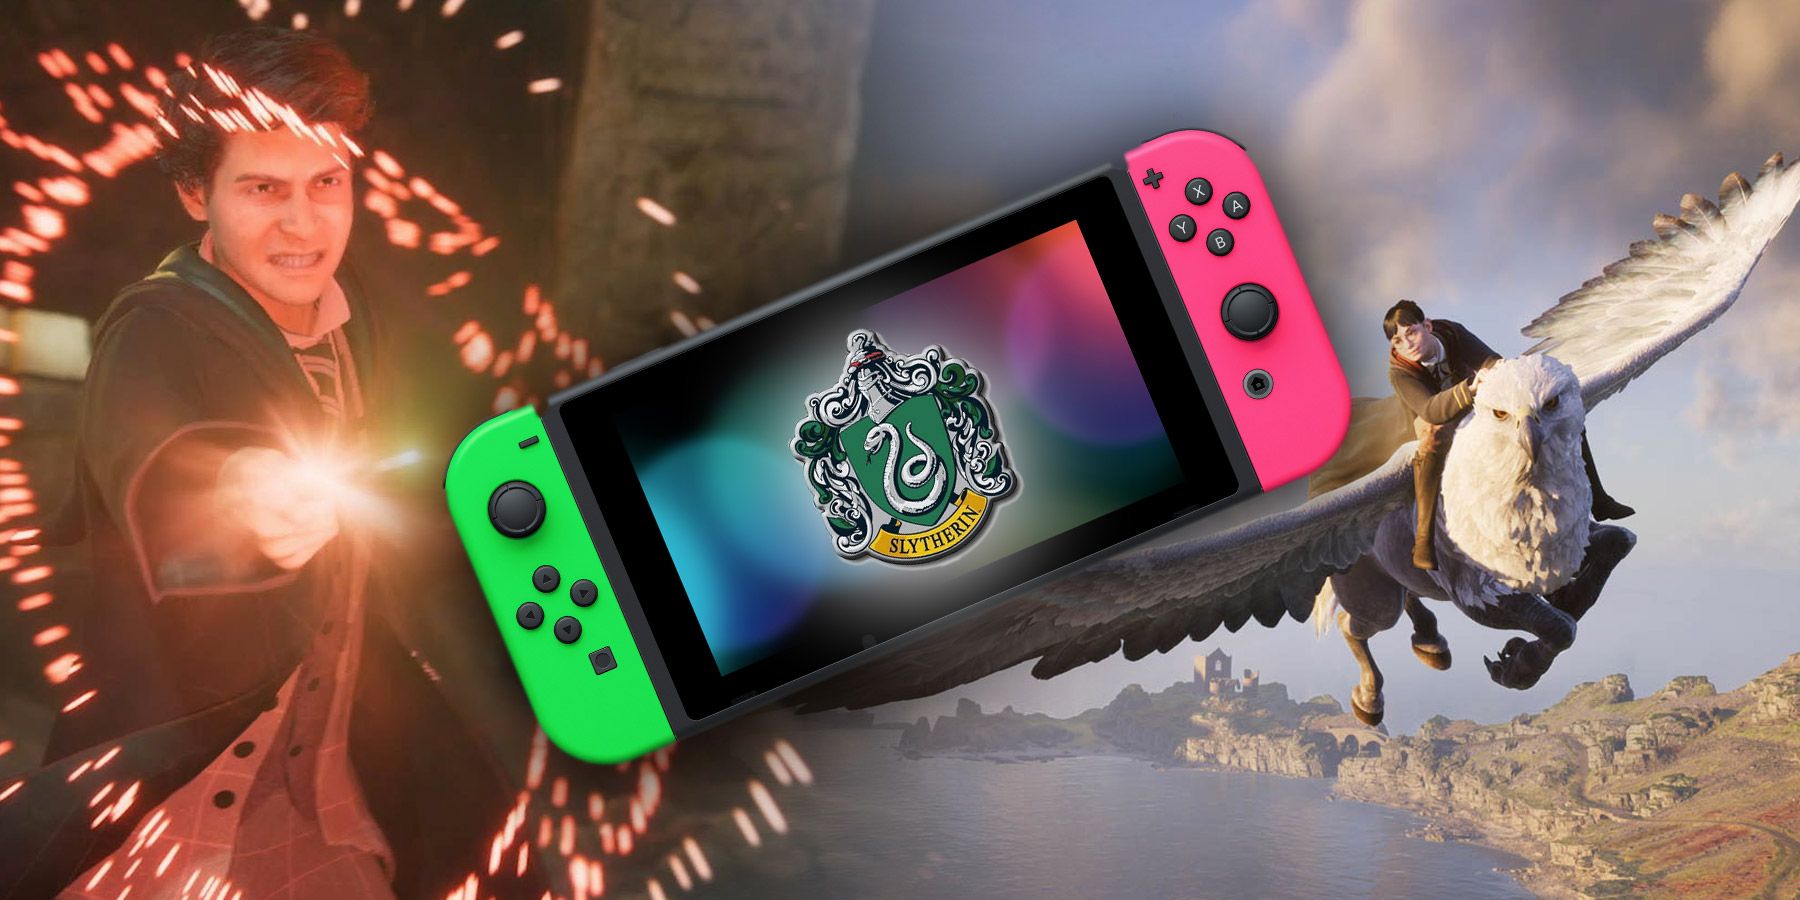 Hogwarts Legacy Is Also Coming To Nintendo Switch